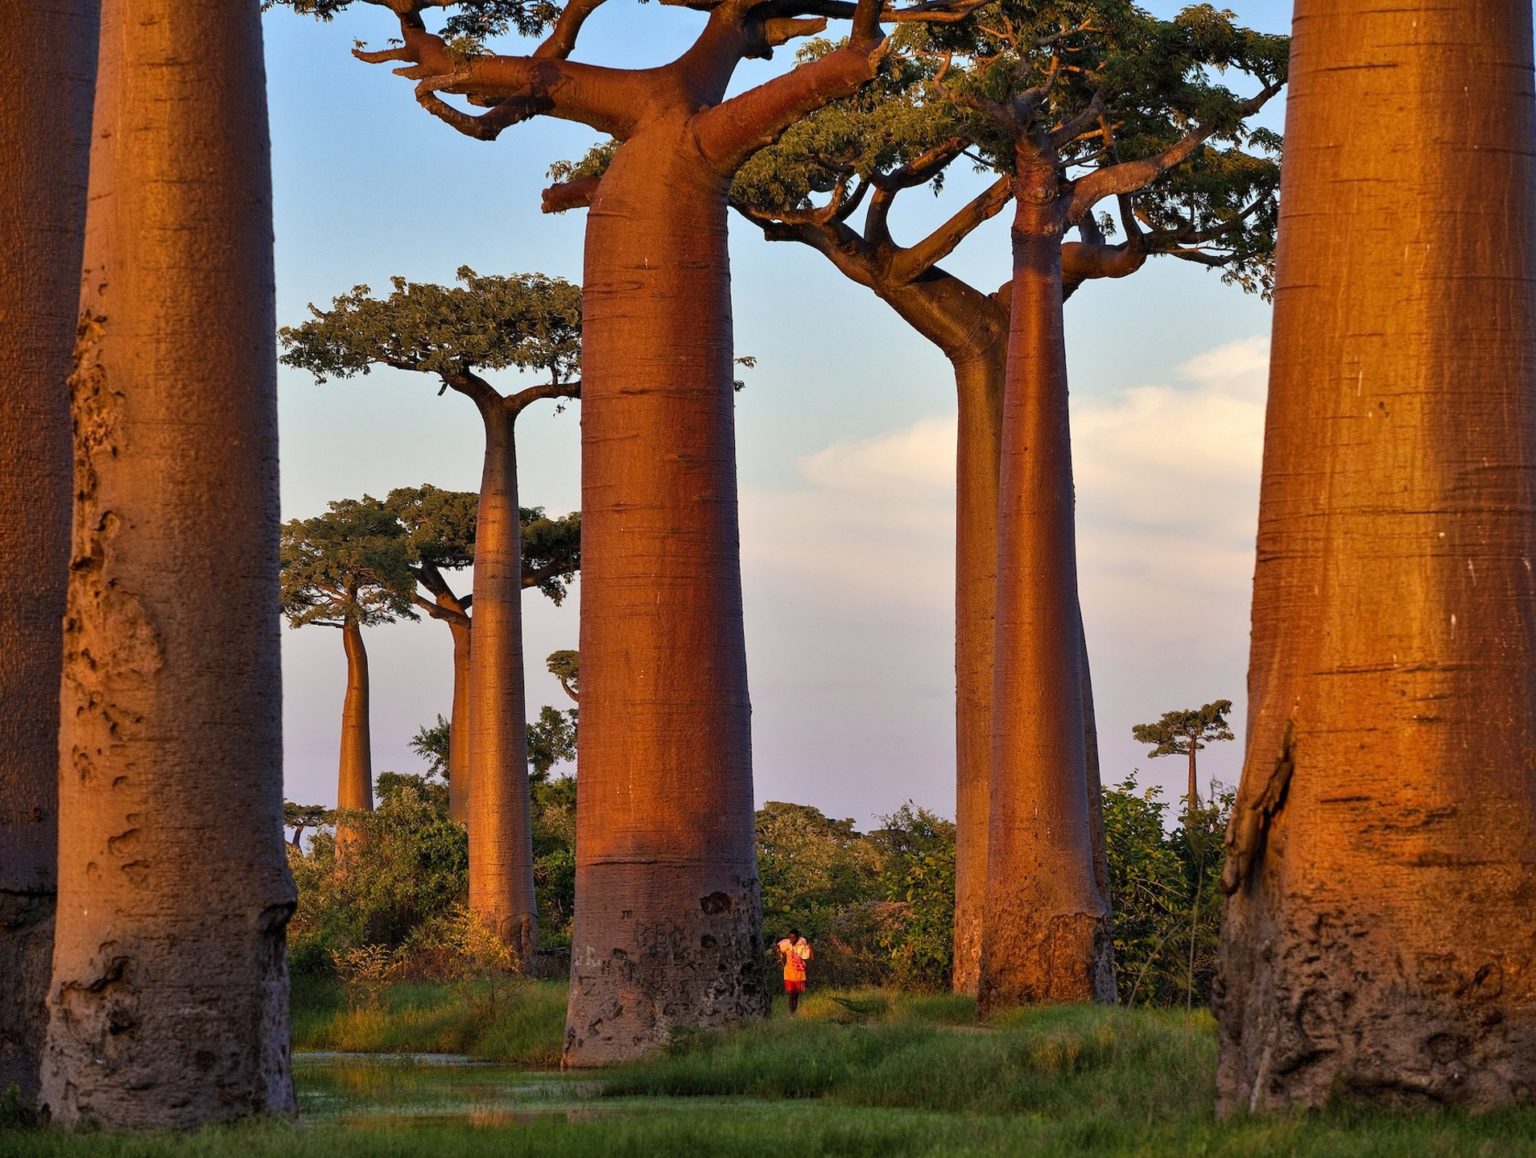 looming baobab trees dwarf a small person in the landscape